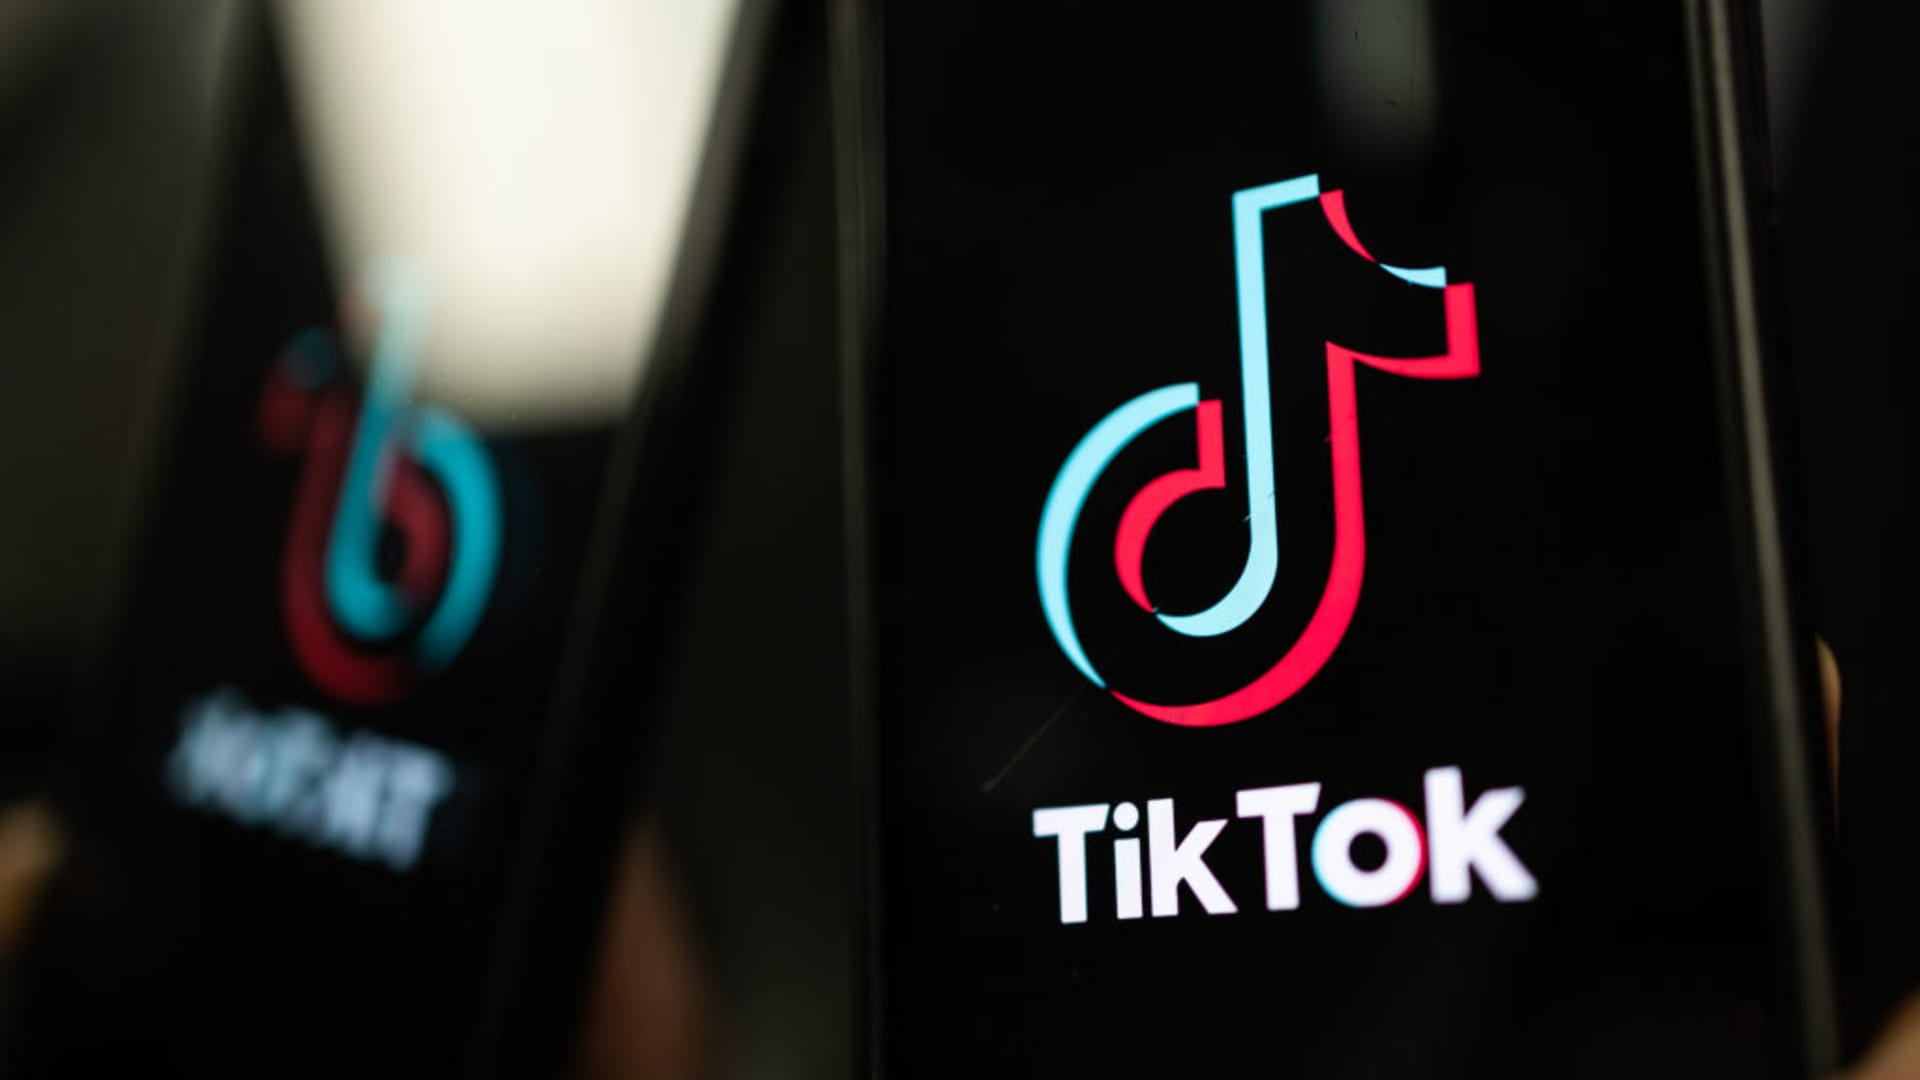 How to filter comments on TikTok